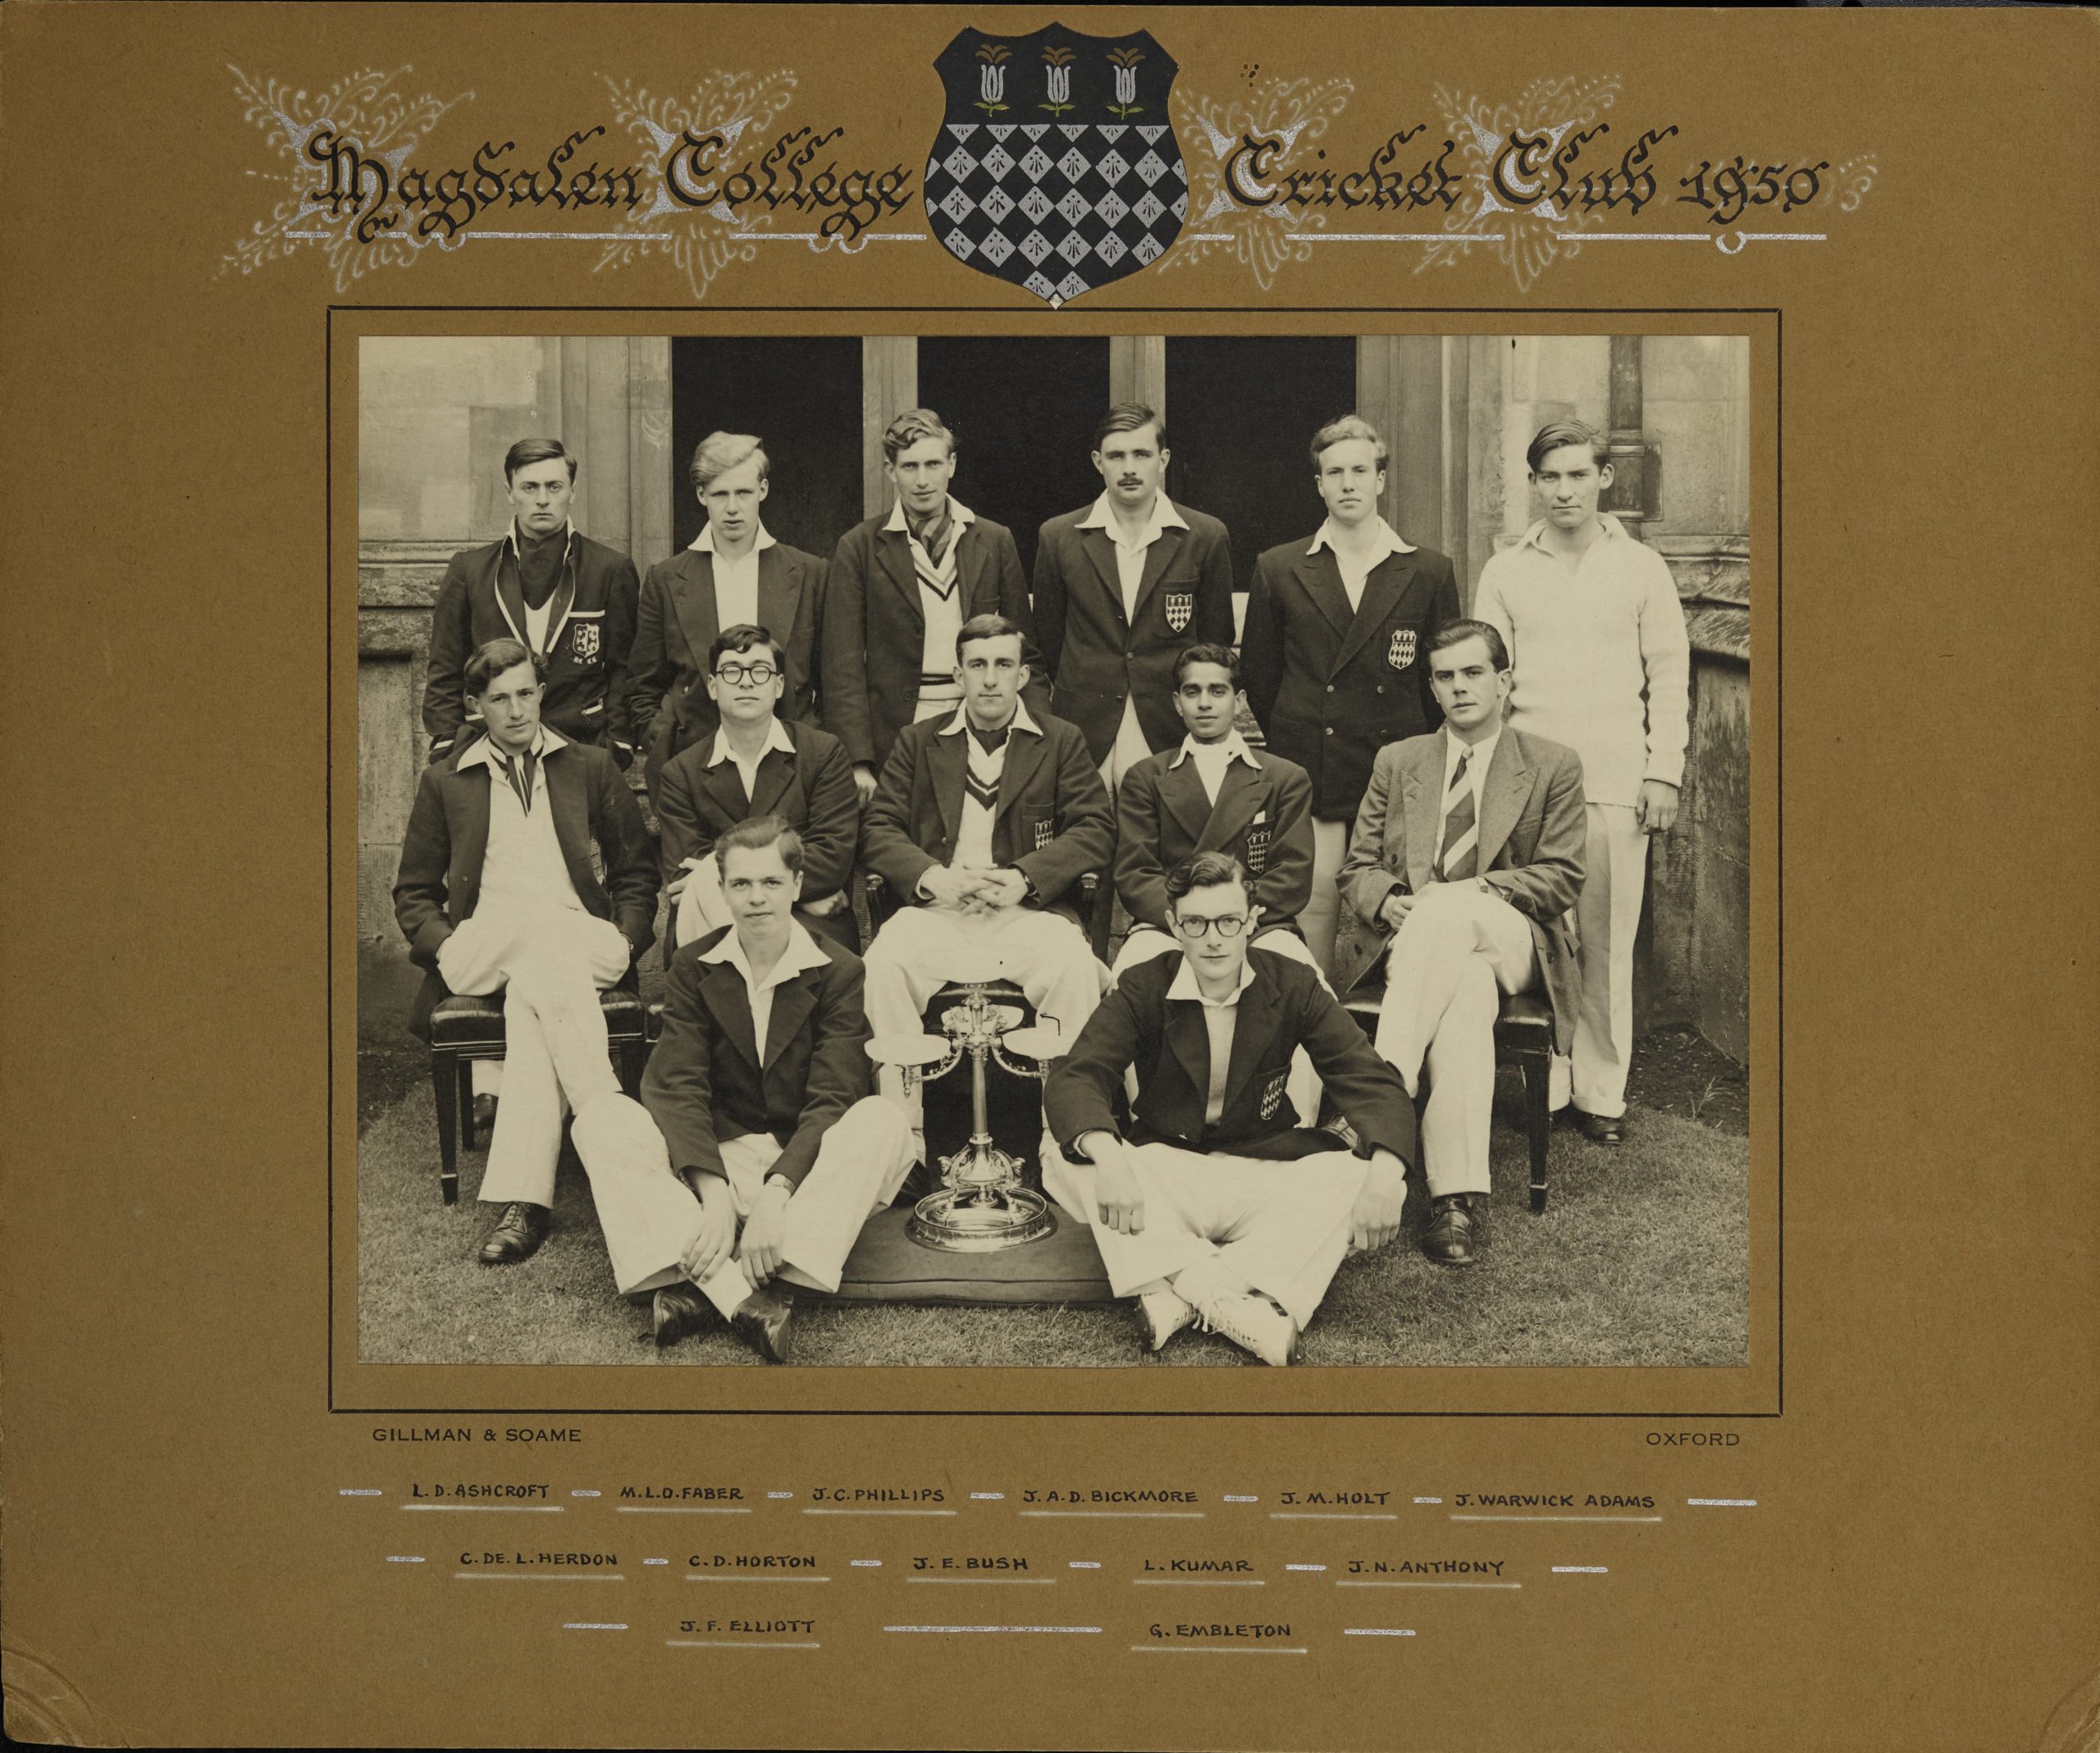 Black and white photograph of the cricket team, posed in the cloisters. 6 men are standing, 5 (including Lovraj Kumar) are sitting in chairs in front of them, and finally 2 men are sitting cross-legged at the front. Between the two men at the front is some kind of metal object- possibly a trophy. In the frame of the photo, the names of the men are handwritten in all caps, according to their position on the photo, thus: Back row: L. D. Ashcroft, M. L. D. Faber, J. A. D. Bickmore, J. M. Holt, and J. Warwick Adams. Middle row: C. de. L. Herdon, C. D. Horton, J. E. Bush, L. Kumar, J. N, Anthony. Front row: J. F. Elliott and G. Embleton.